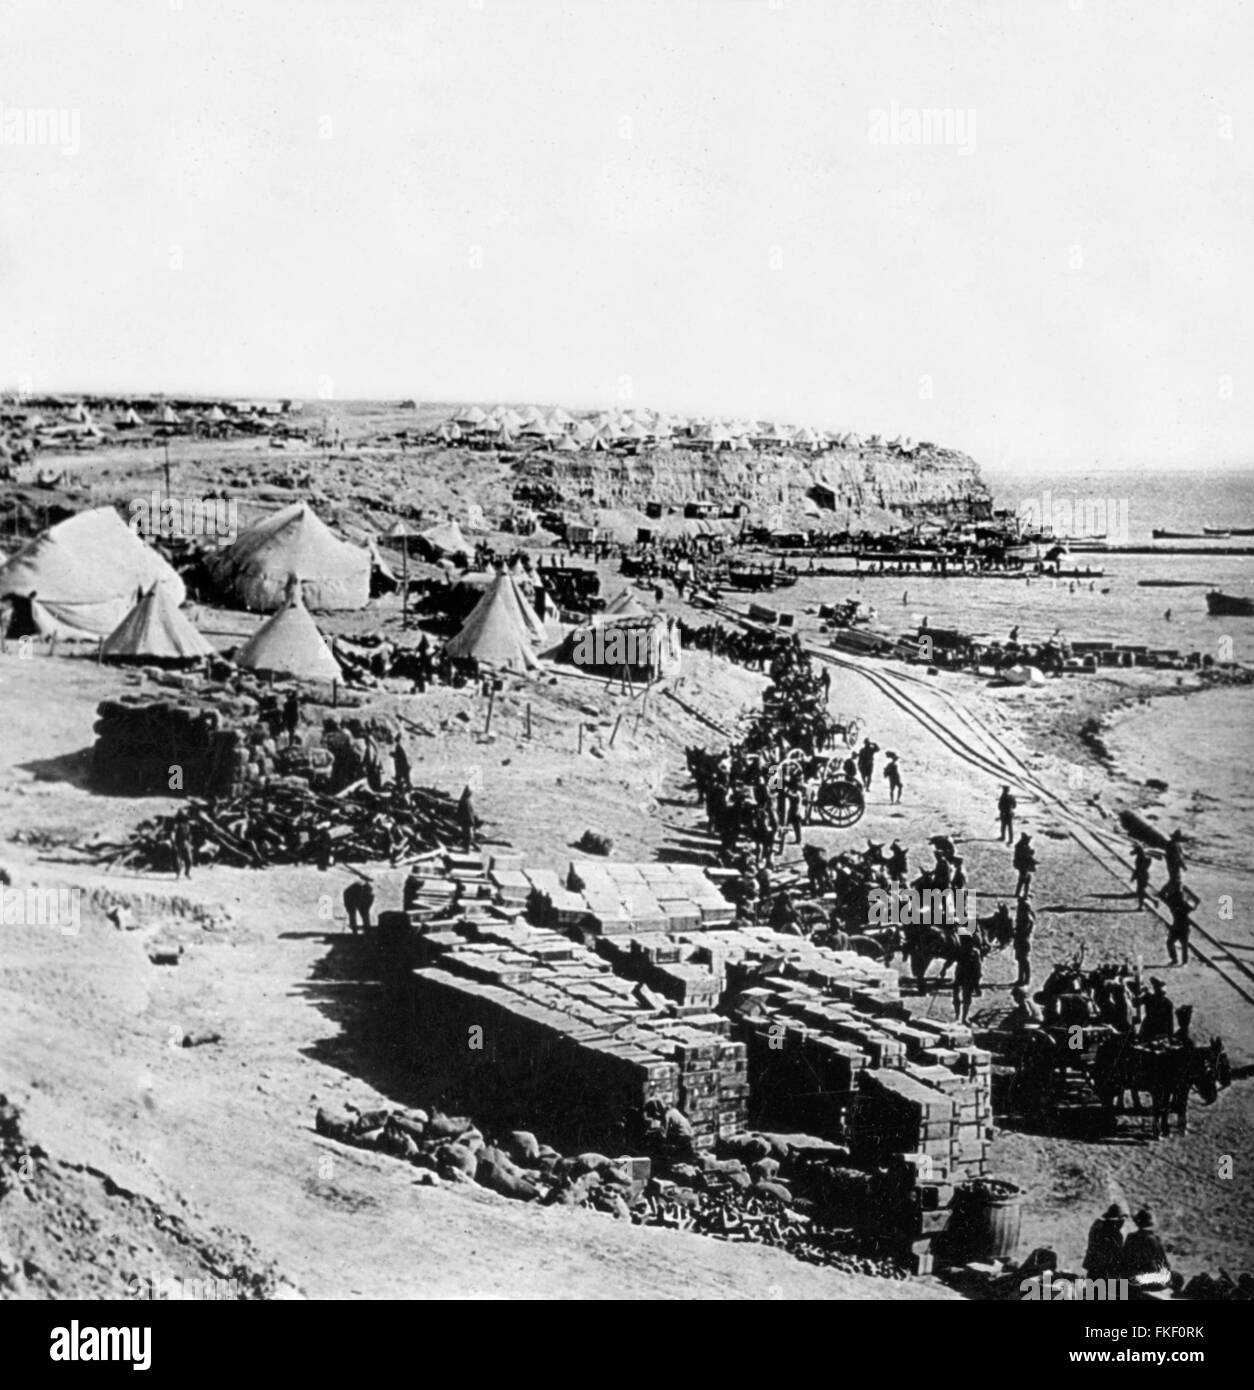 Gallipoli. West Beach, Gallipoli during the Gallipoli Campaign in World War I. The beach was the site of British landings and several battles. Photo c.1915-1916 Stock Photo